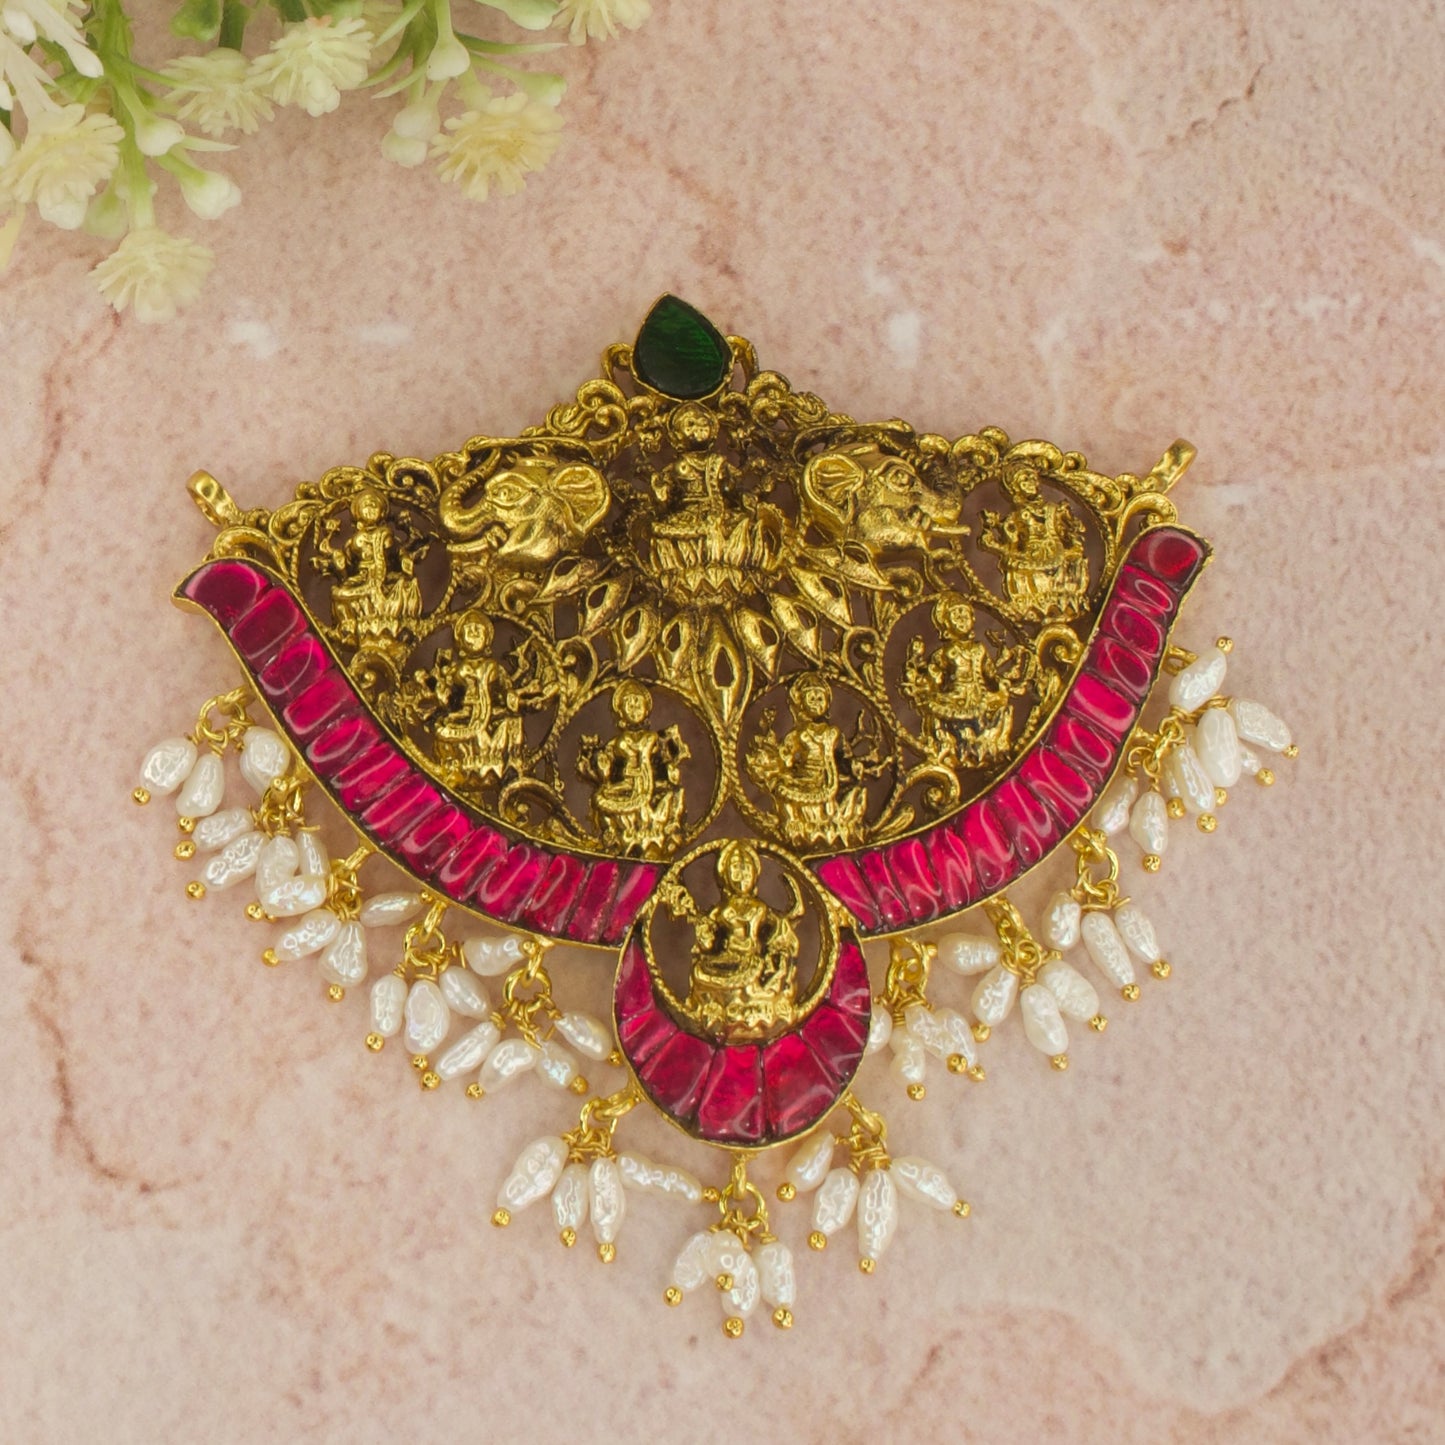 This is a Nakshi finished Pendant with Jadau Kundan work on it. This pendant has 8 Motifs of Goddess Lakshmi and at the bottom of the pendant we have Ricepearls